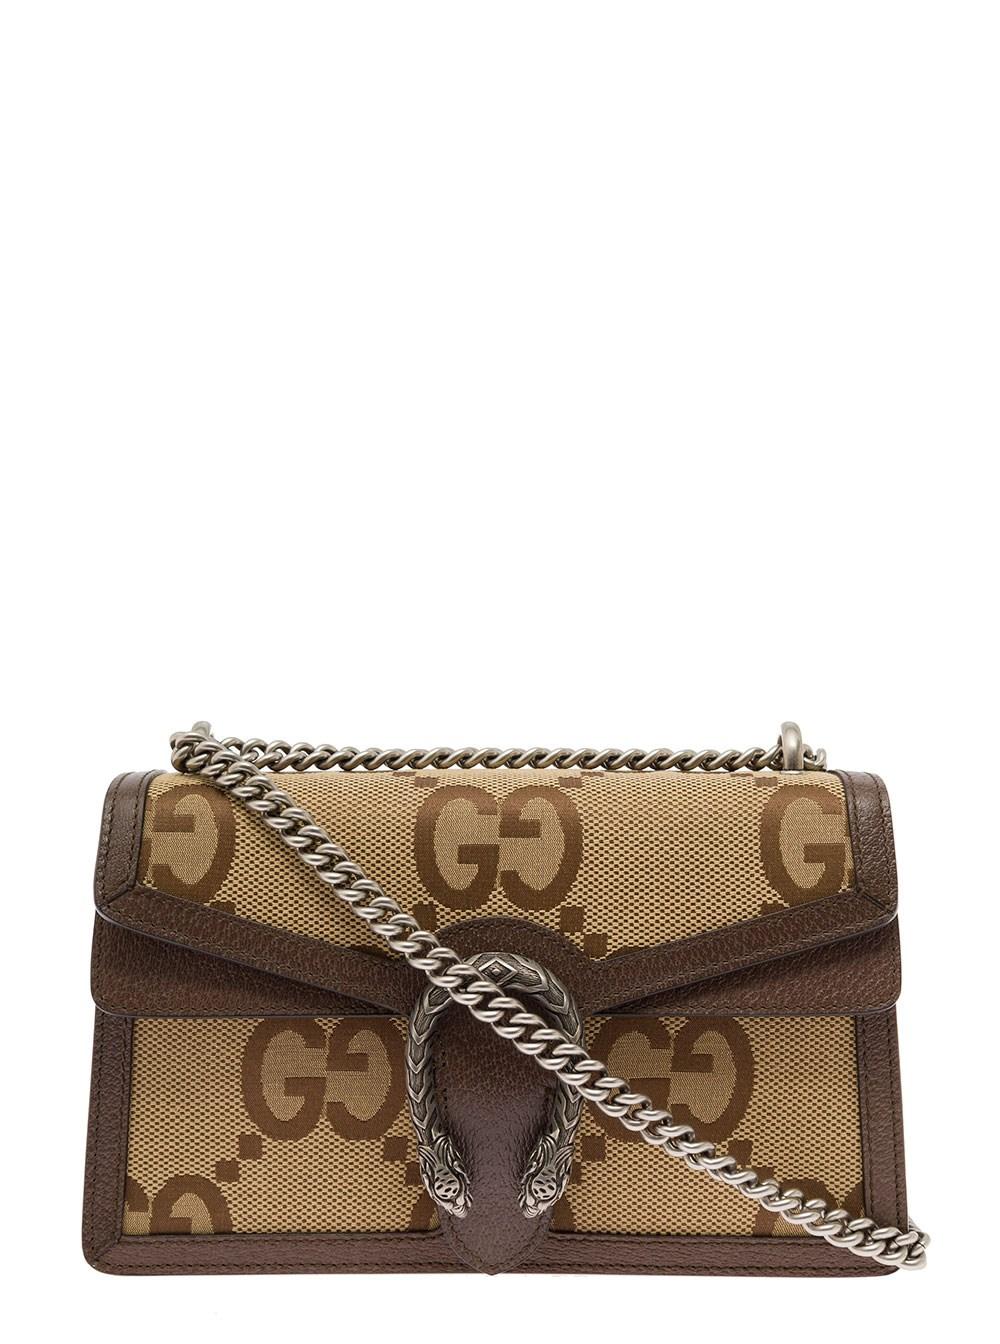 Gucci Woman's Dionysus Jumbo gg Fabric Crossbody Bag With Leather Inserts  in Brown | Lyst